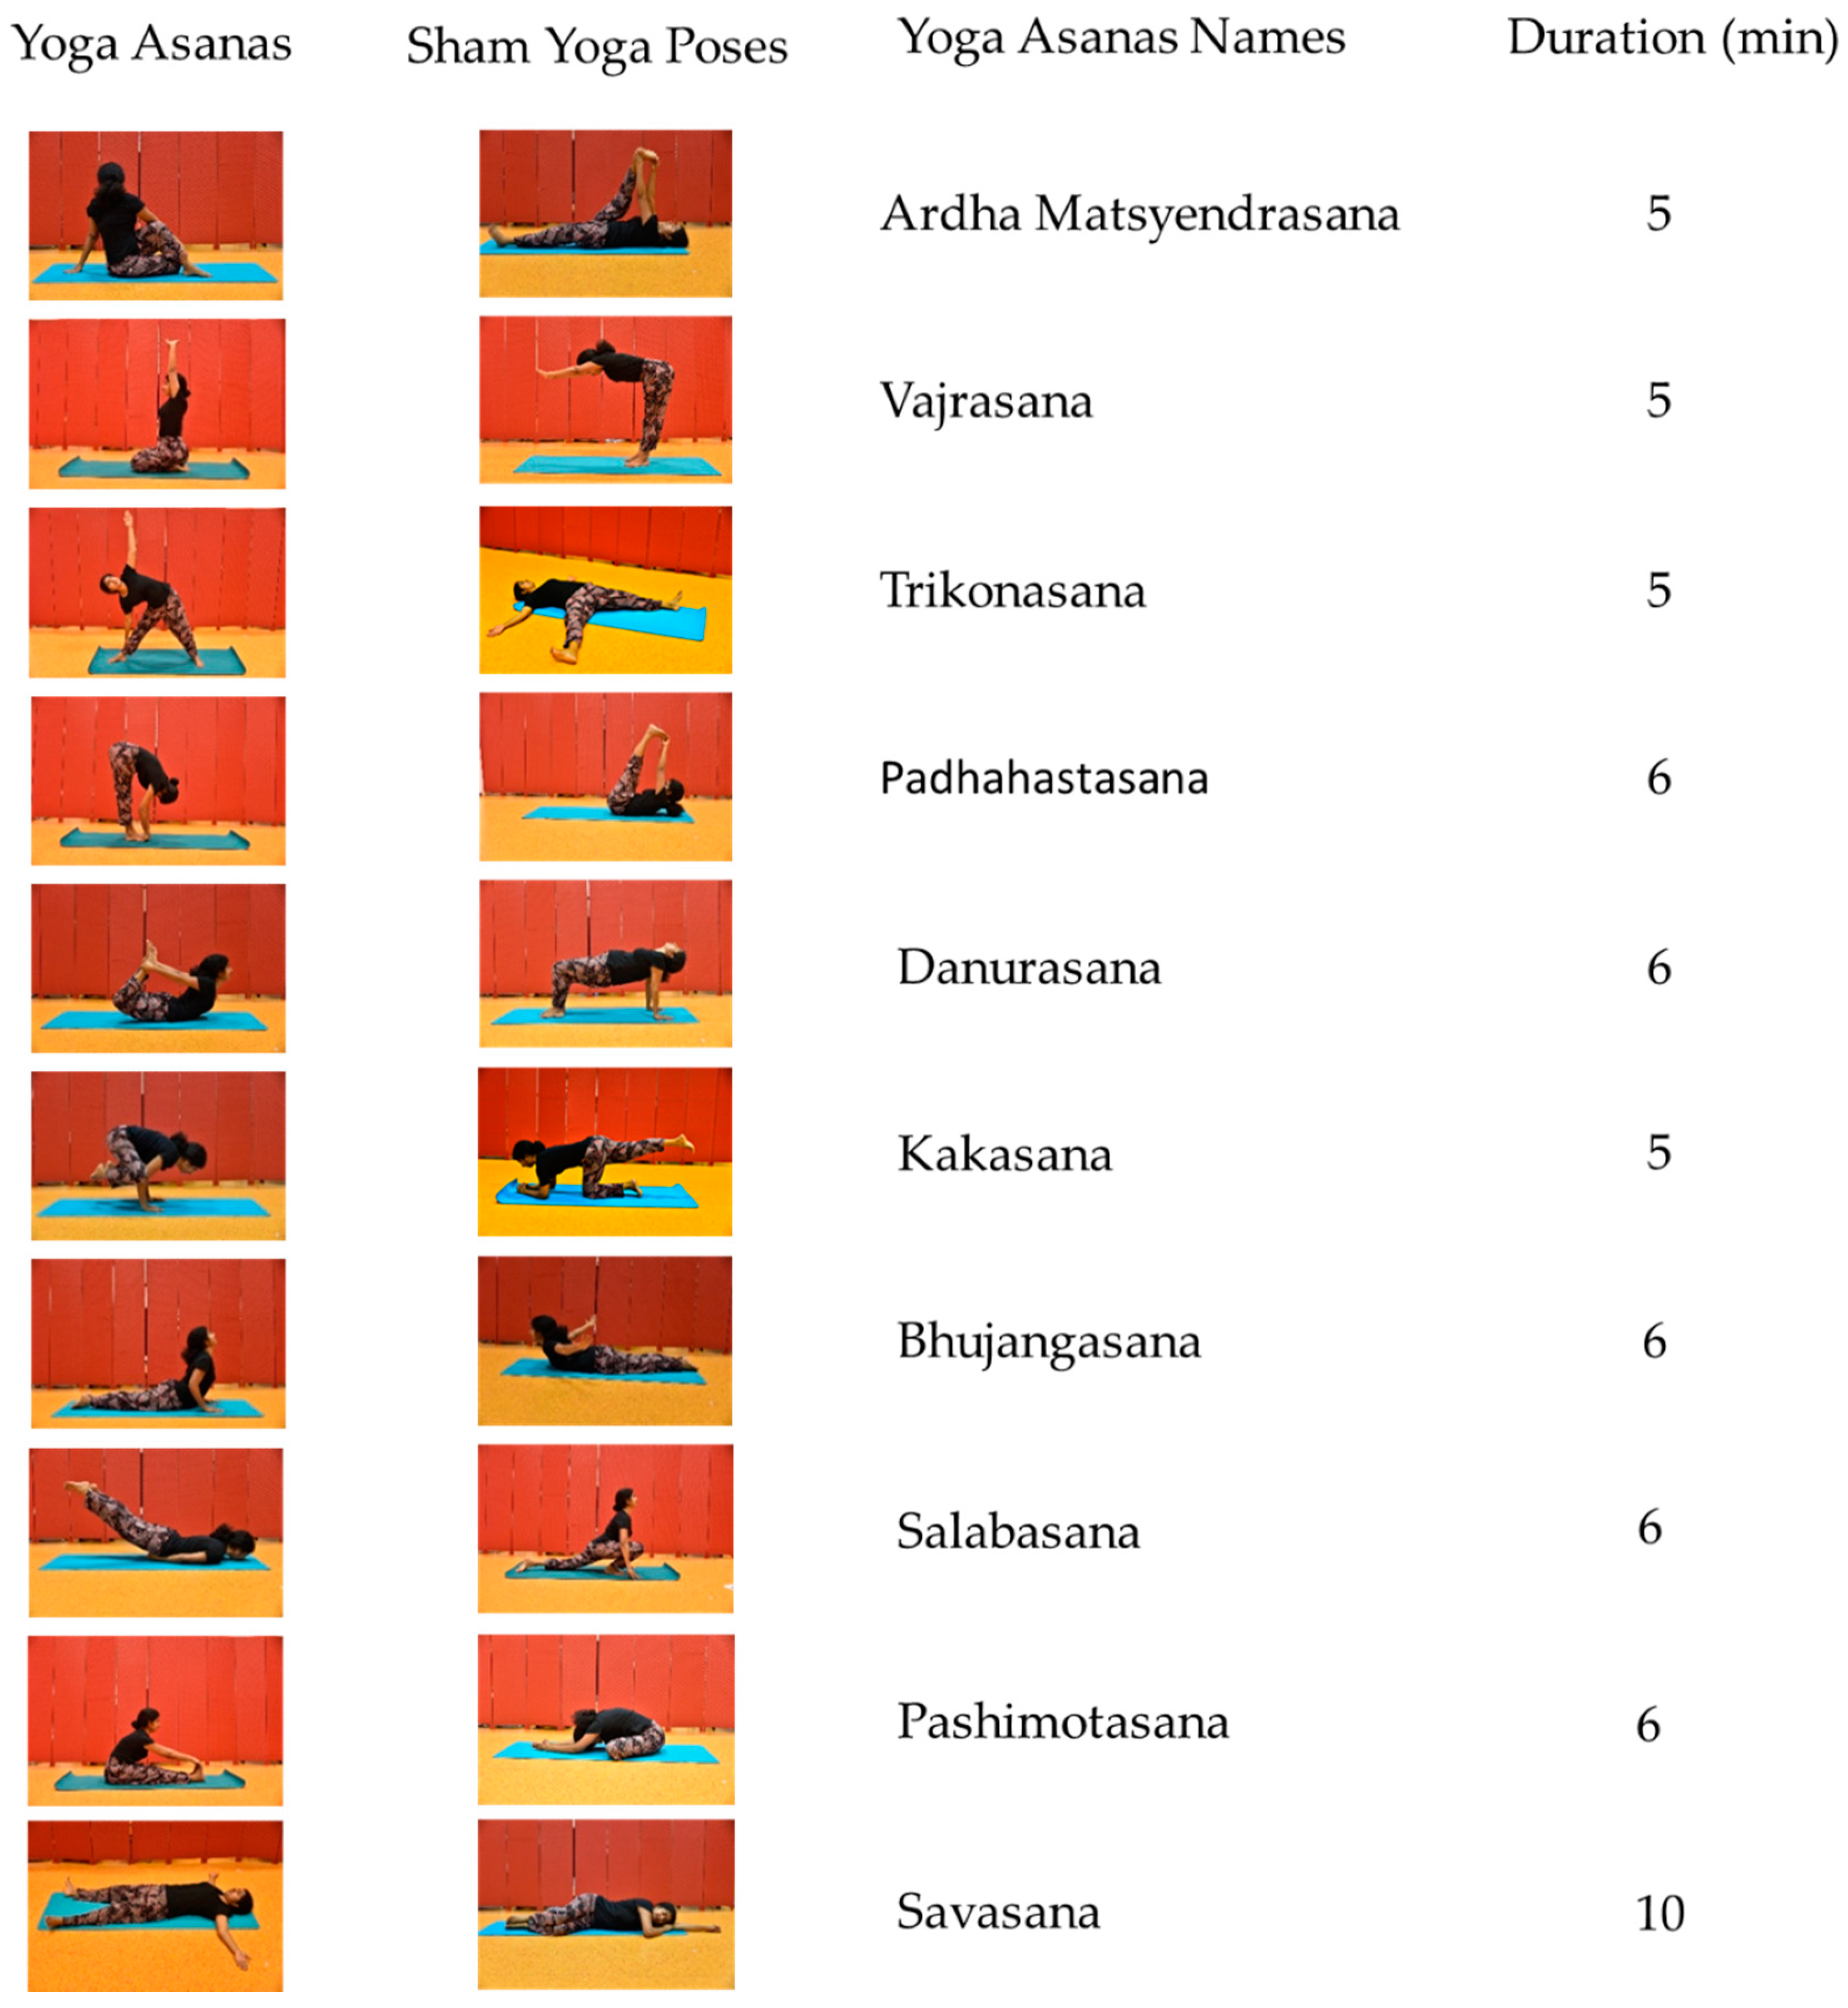 Buy Iyengar Yoga: Classic Yoga Postures for Mind, Body and Spirit Book  Online at Low Prices in India | Iyengar Yoga: Classic Yoga Postures for  Mind, Body and Spirit Reviews & Ratings -